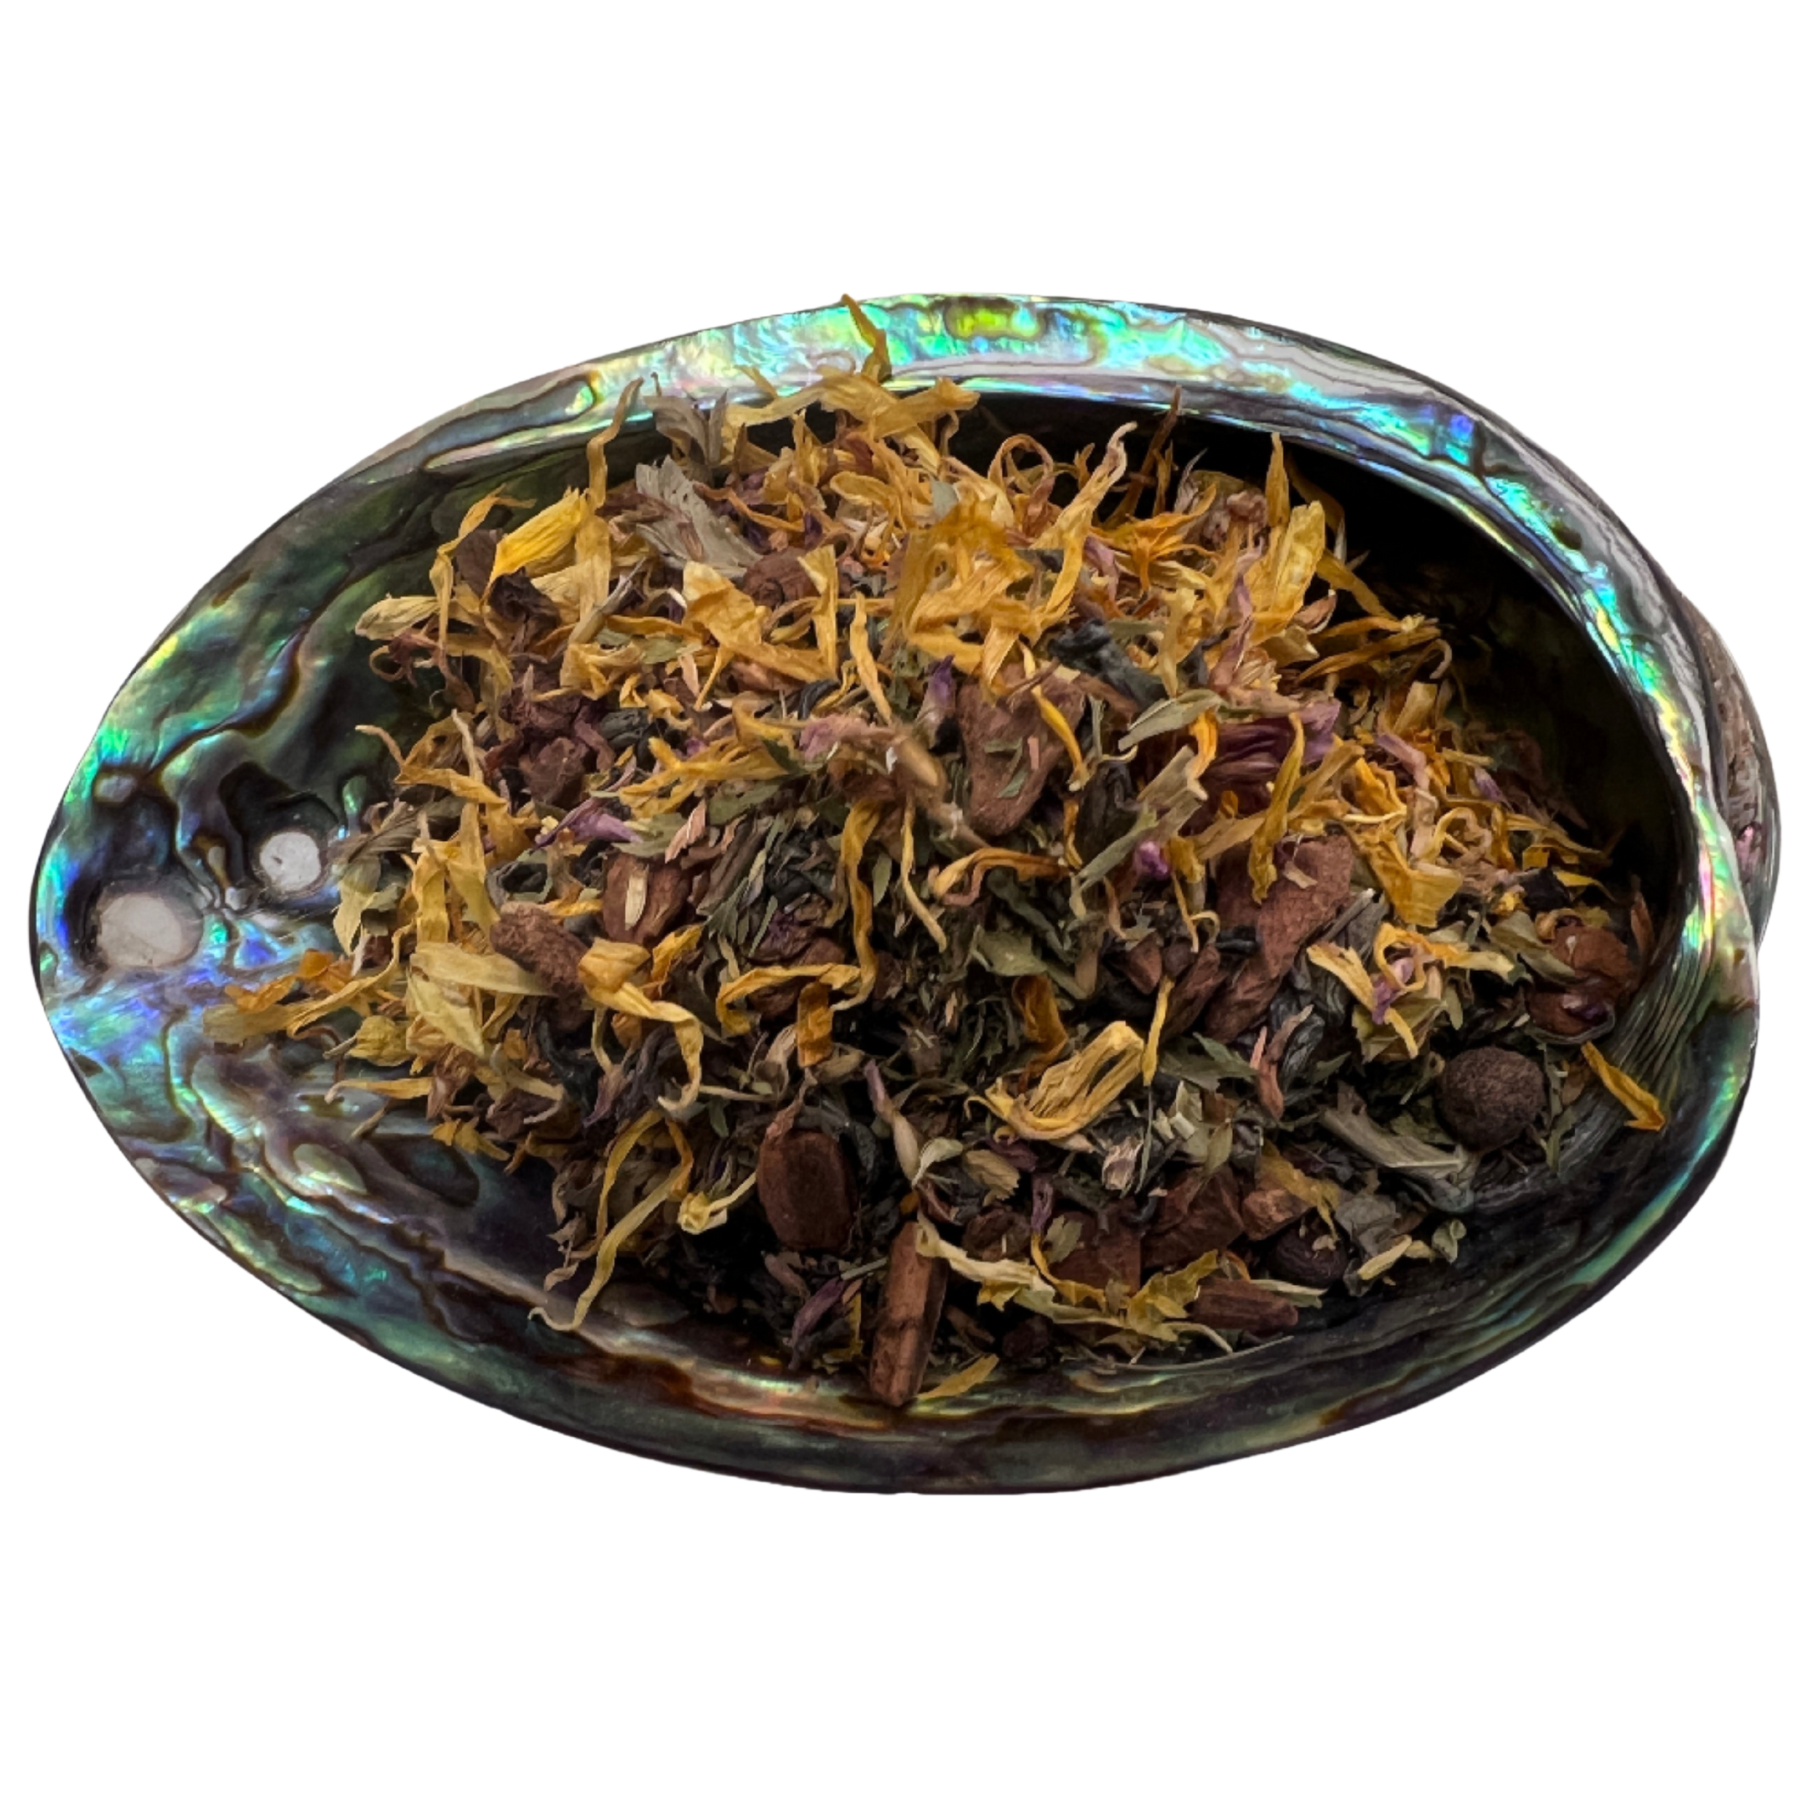 Dried mixed herbs named Manifestation Blend Tea placed on a colorful shell bowl